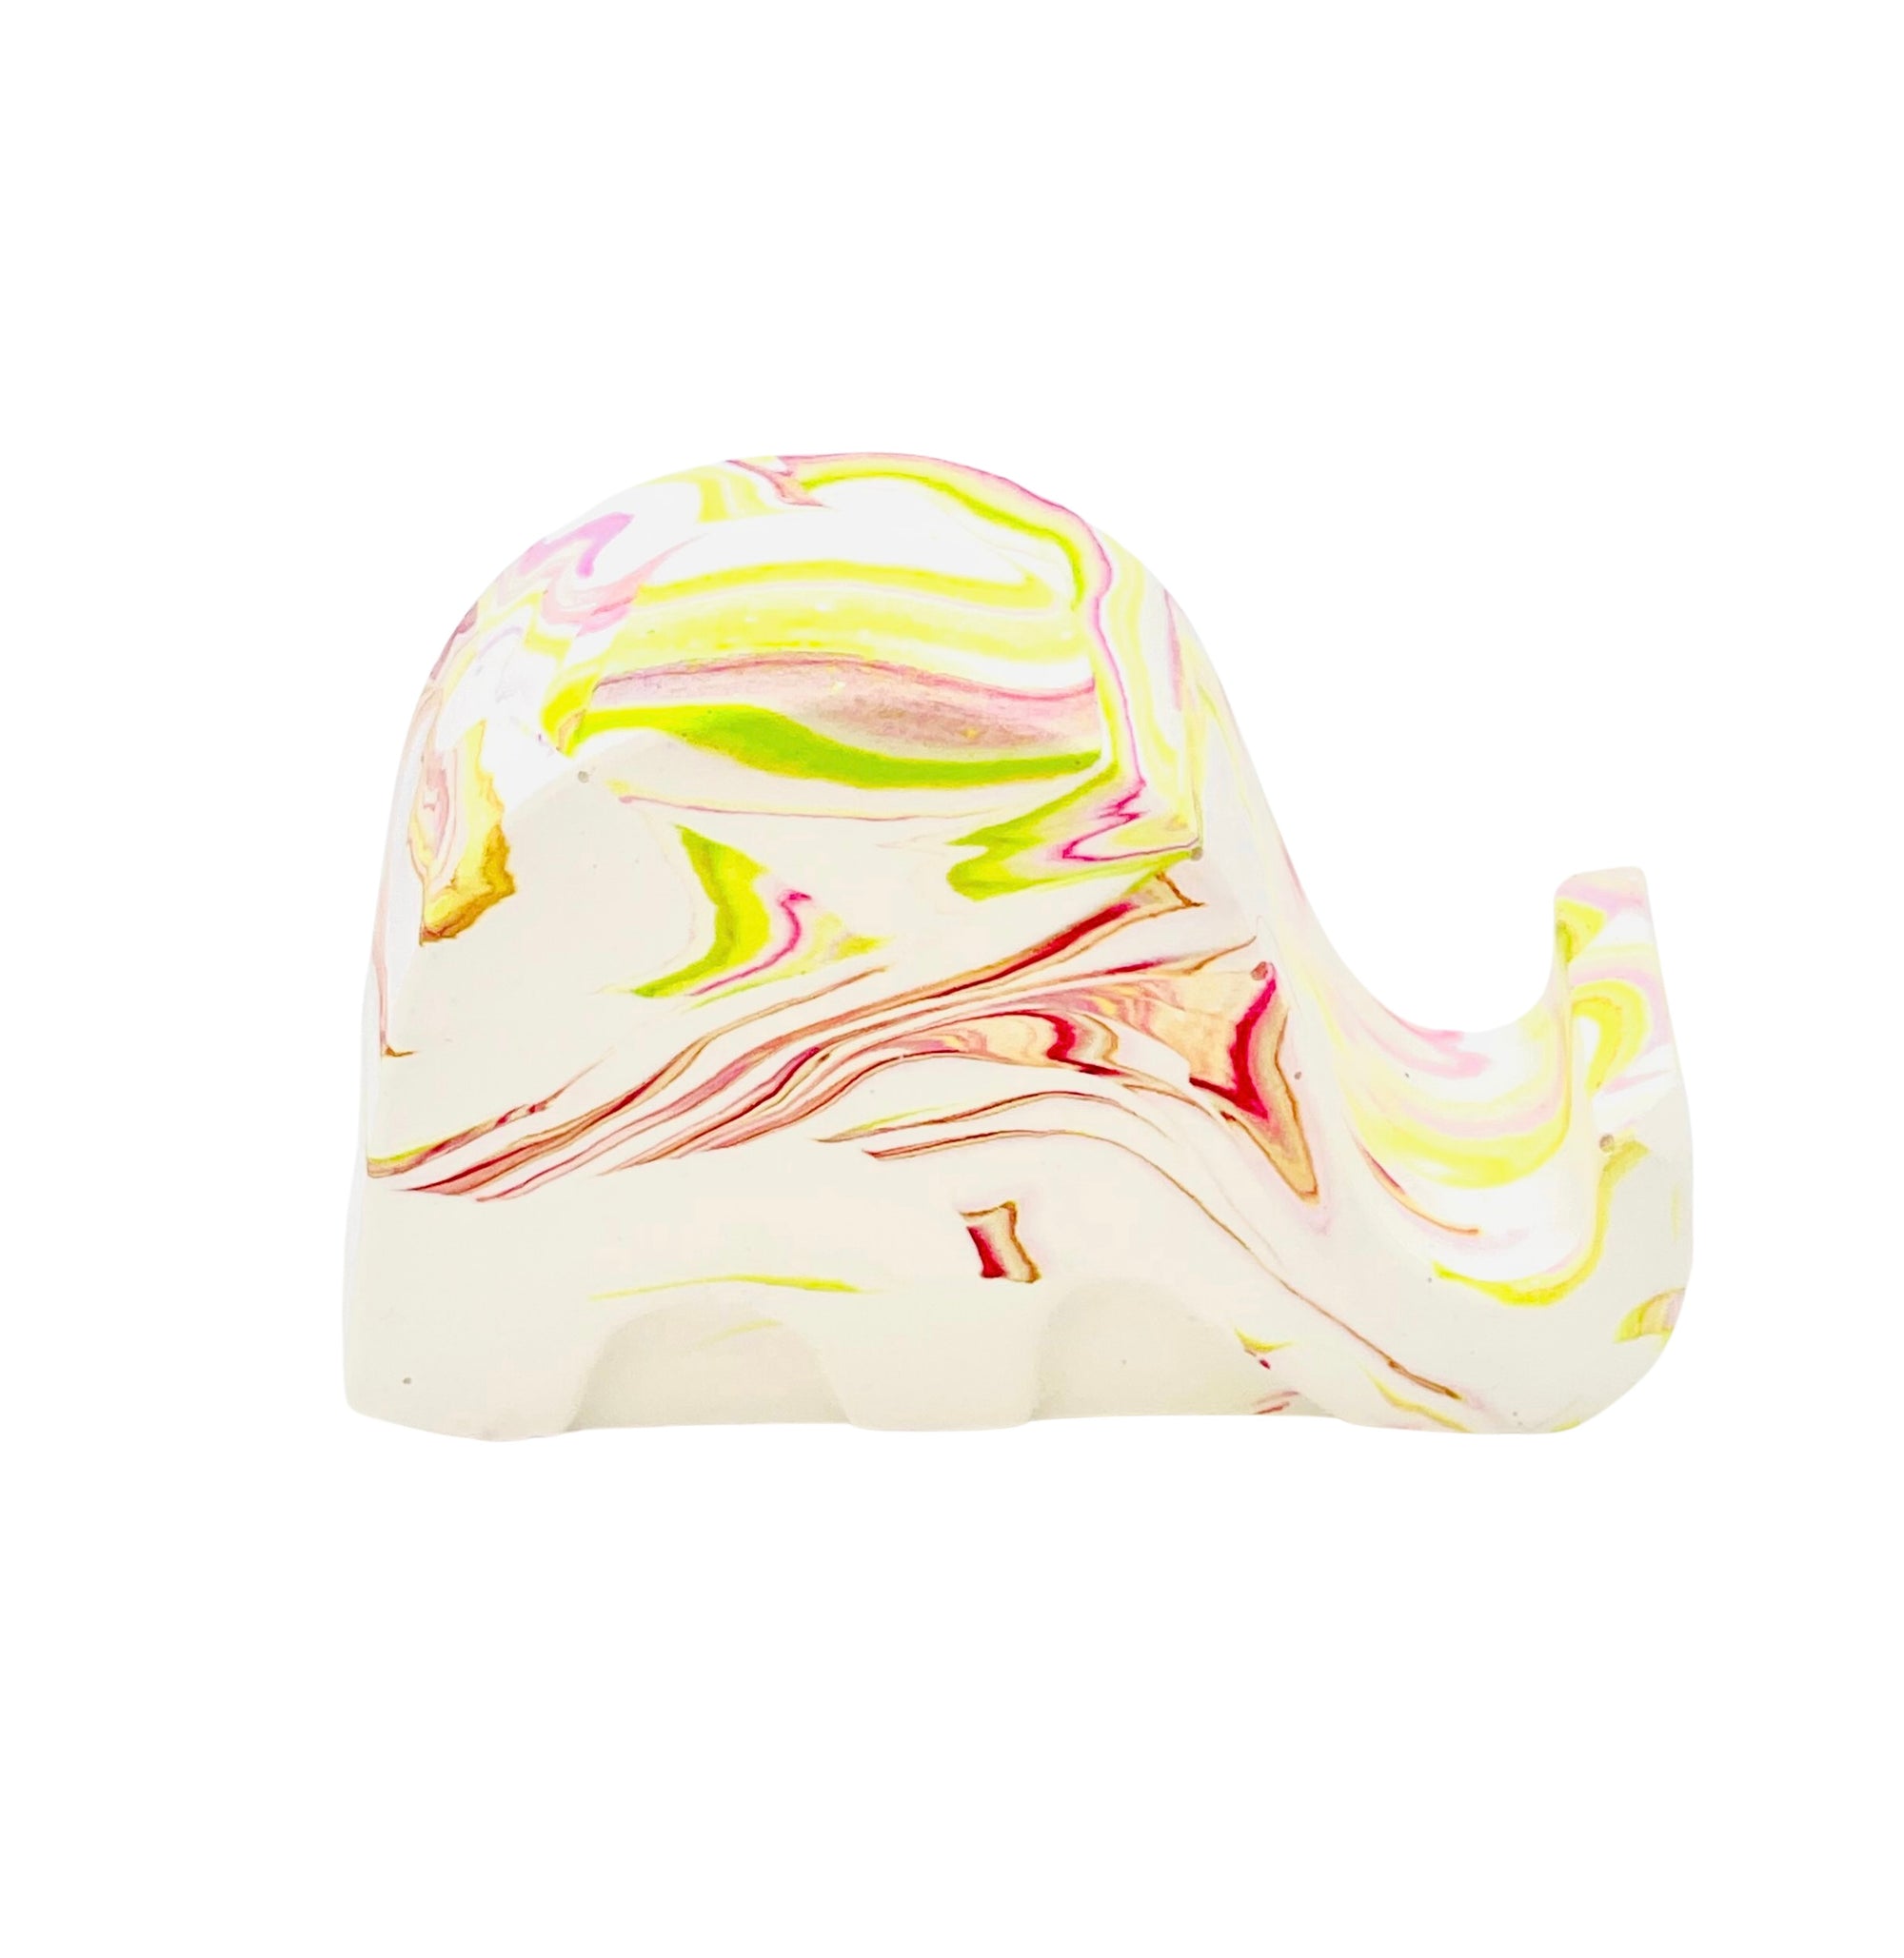 A Jesmonite elephant mobile phone stand measuring 6.5cm in length marbled with magenta and lime green pigment.